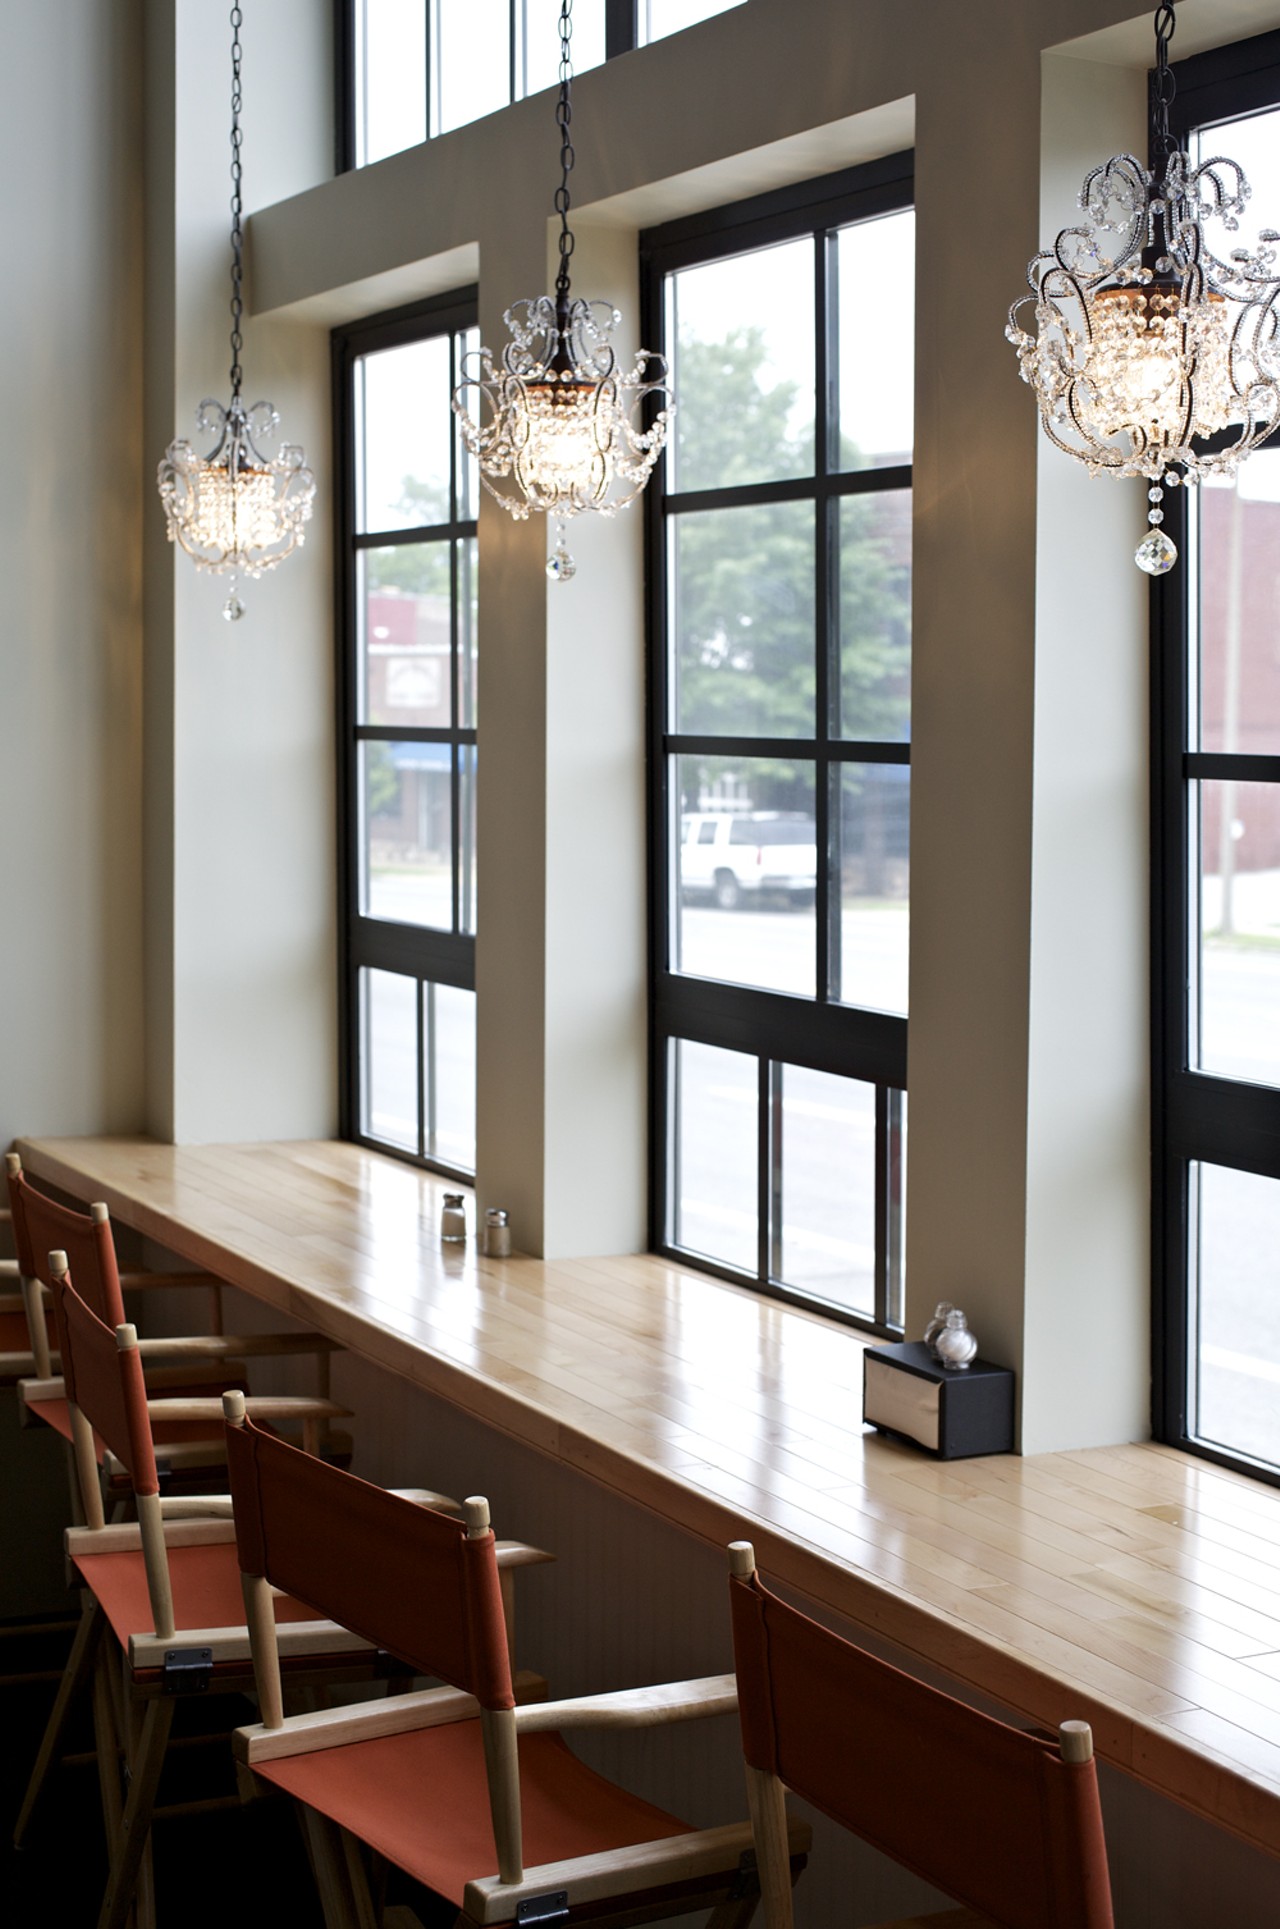 Sweet chandeliers line the bar-height seating along the wall of windows at the front of the bakery.